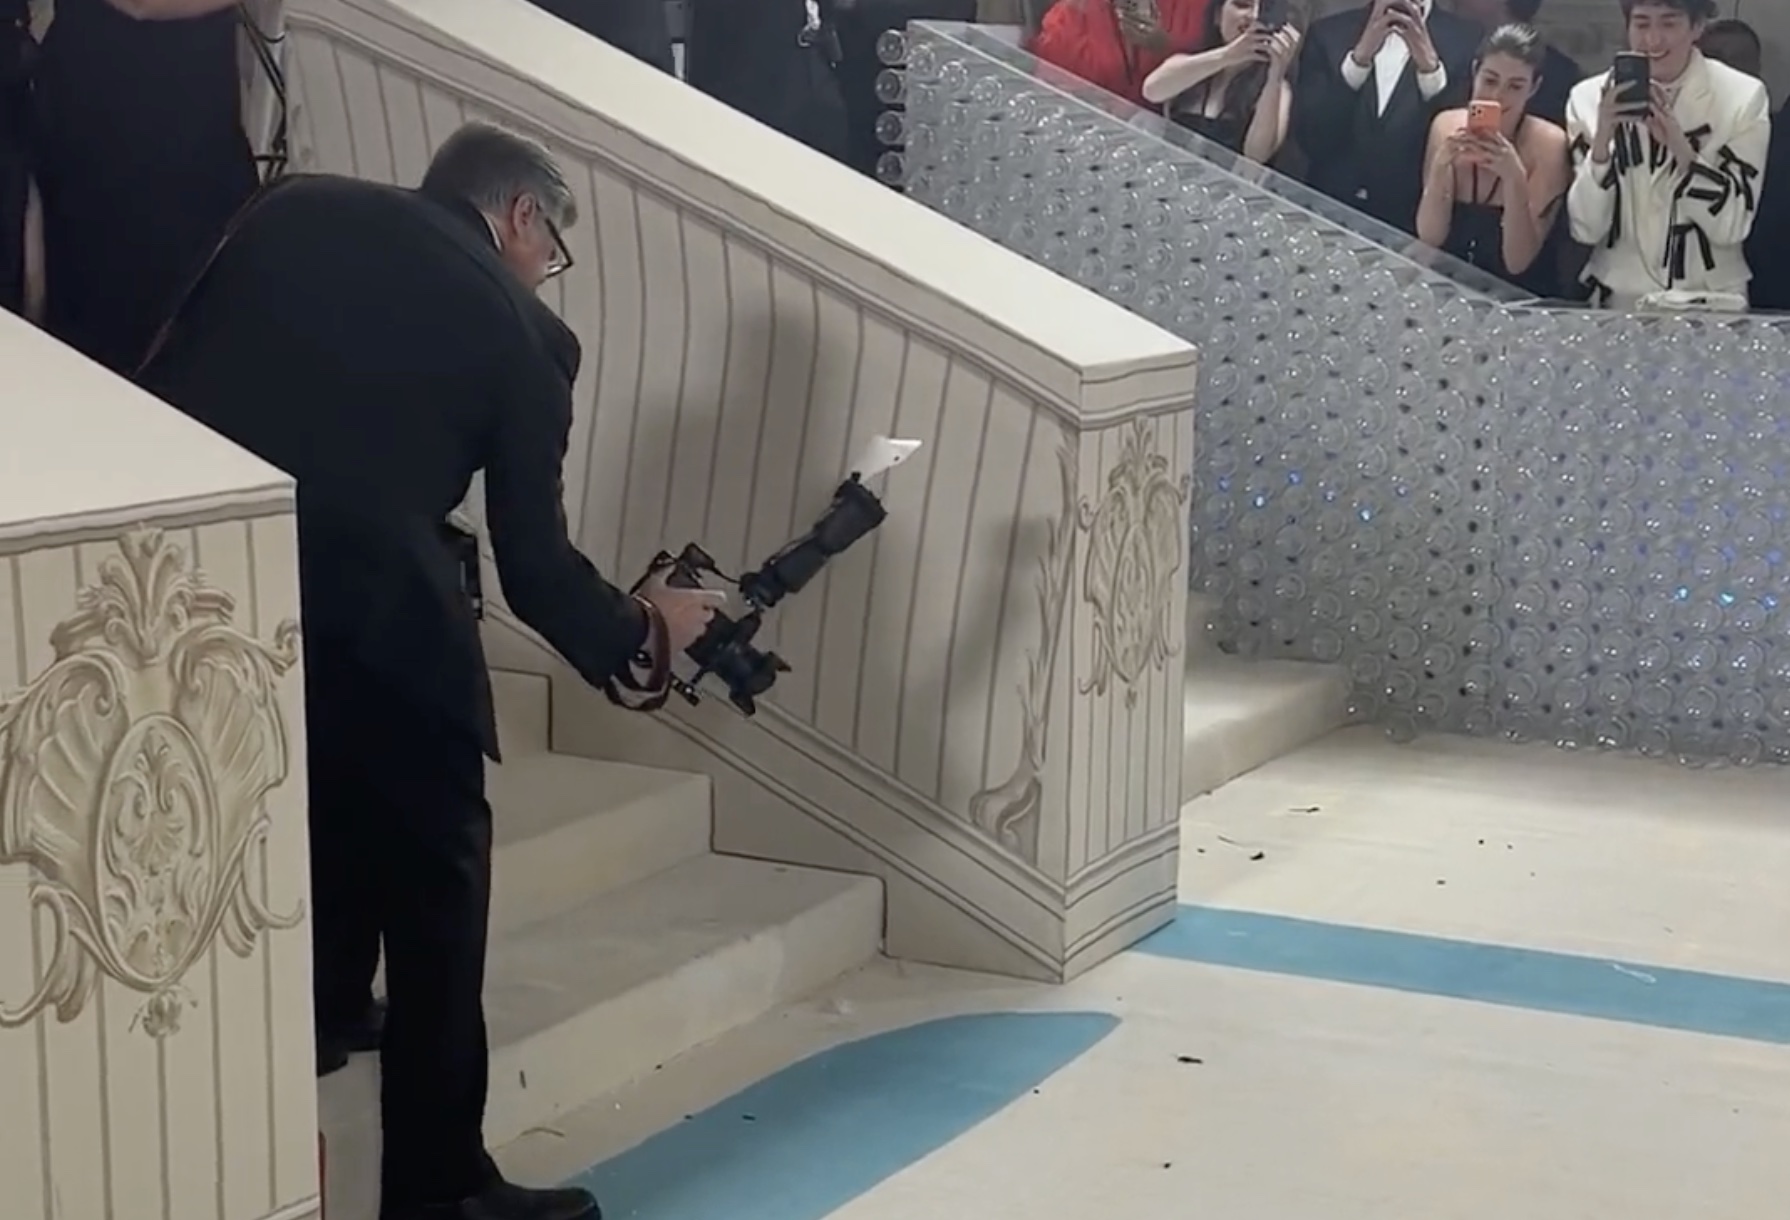 Cockroach Steals the Show, Chases Photographer at Met Gala Red Carpet (mediaite.com)